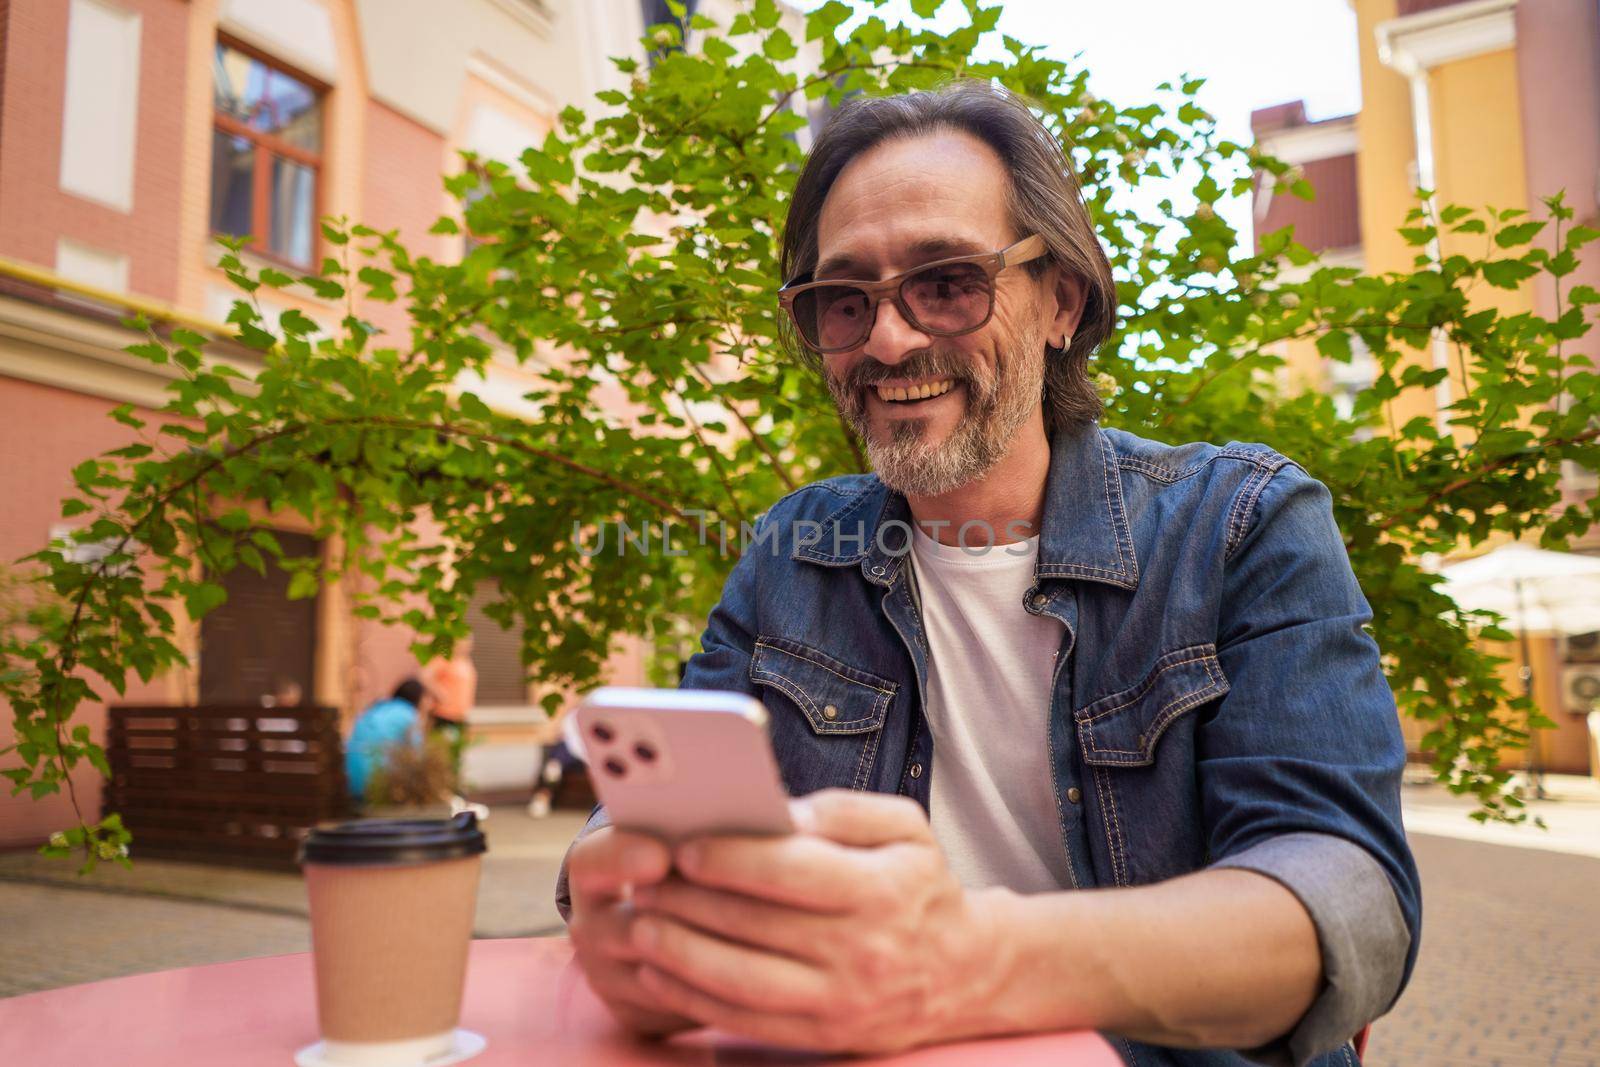 Middle aged handsome freelancer man texting or having a work video call while enjoying coffee outdoors. Mature man looking at phone in hands sitting at cafe while working outdoors.